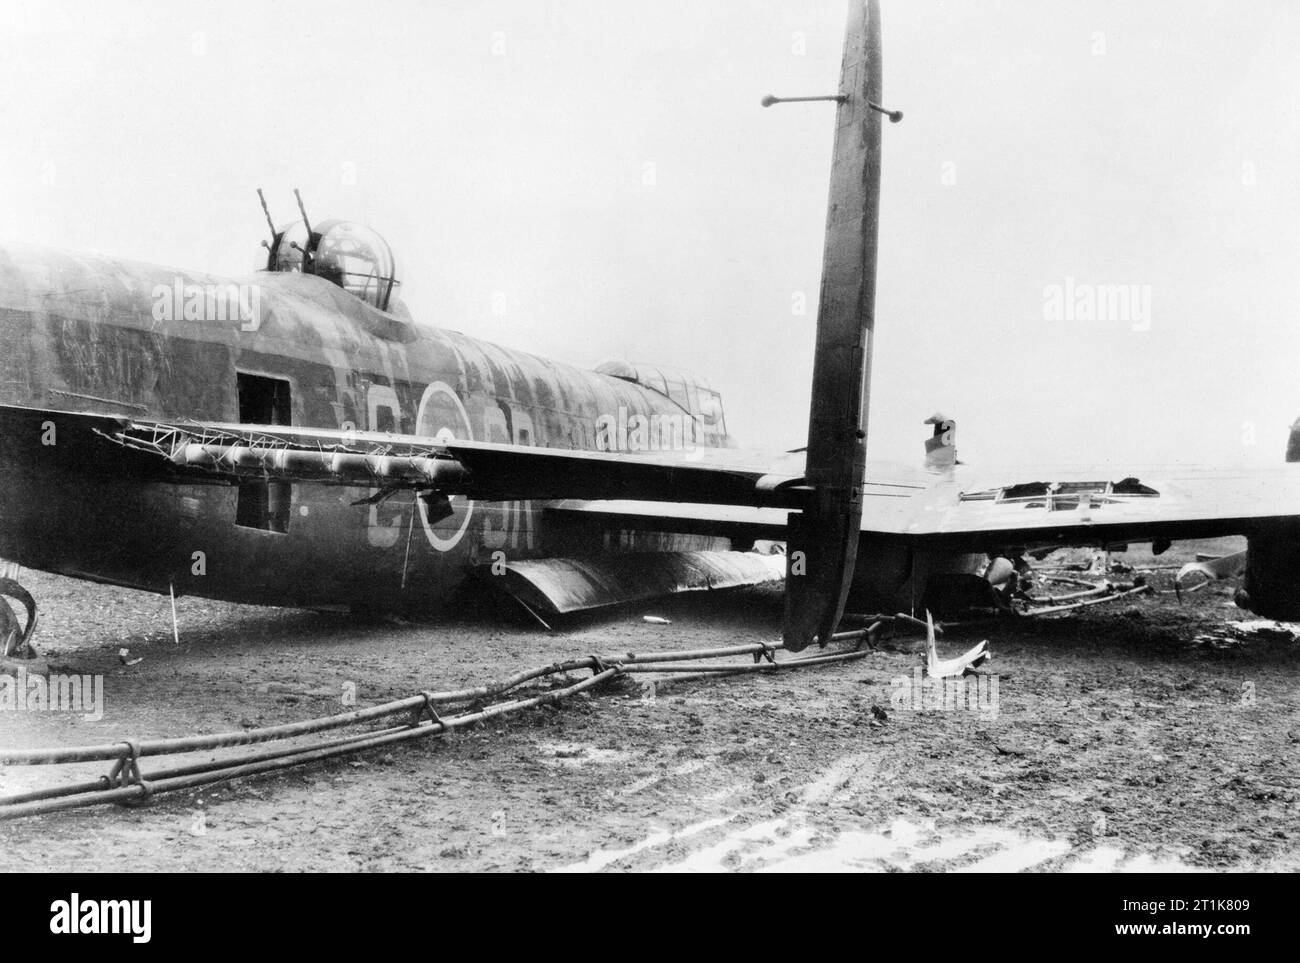 Air Ministry Second World War Official Collection. Damaged Avro Lancaster of No. 101 Squadron RAF (identified by squadron code SR on fuselage) at Ludford Magna, Lincolnshire, after a successful crash-landing on returning from a raid to Augsburg on the night of 25/26 February 1944. Stock Photo